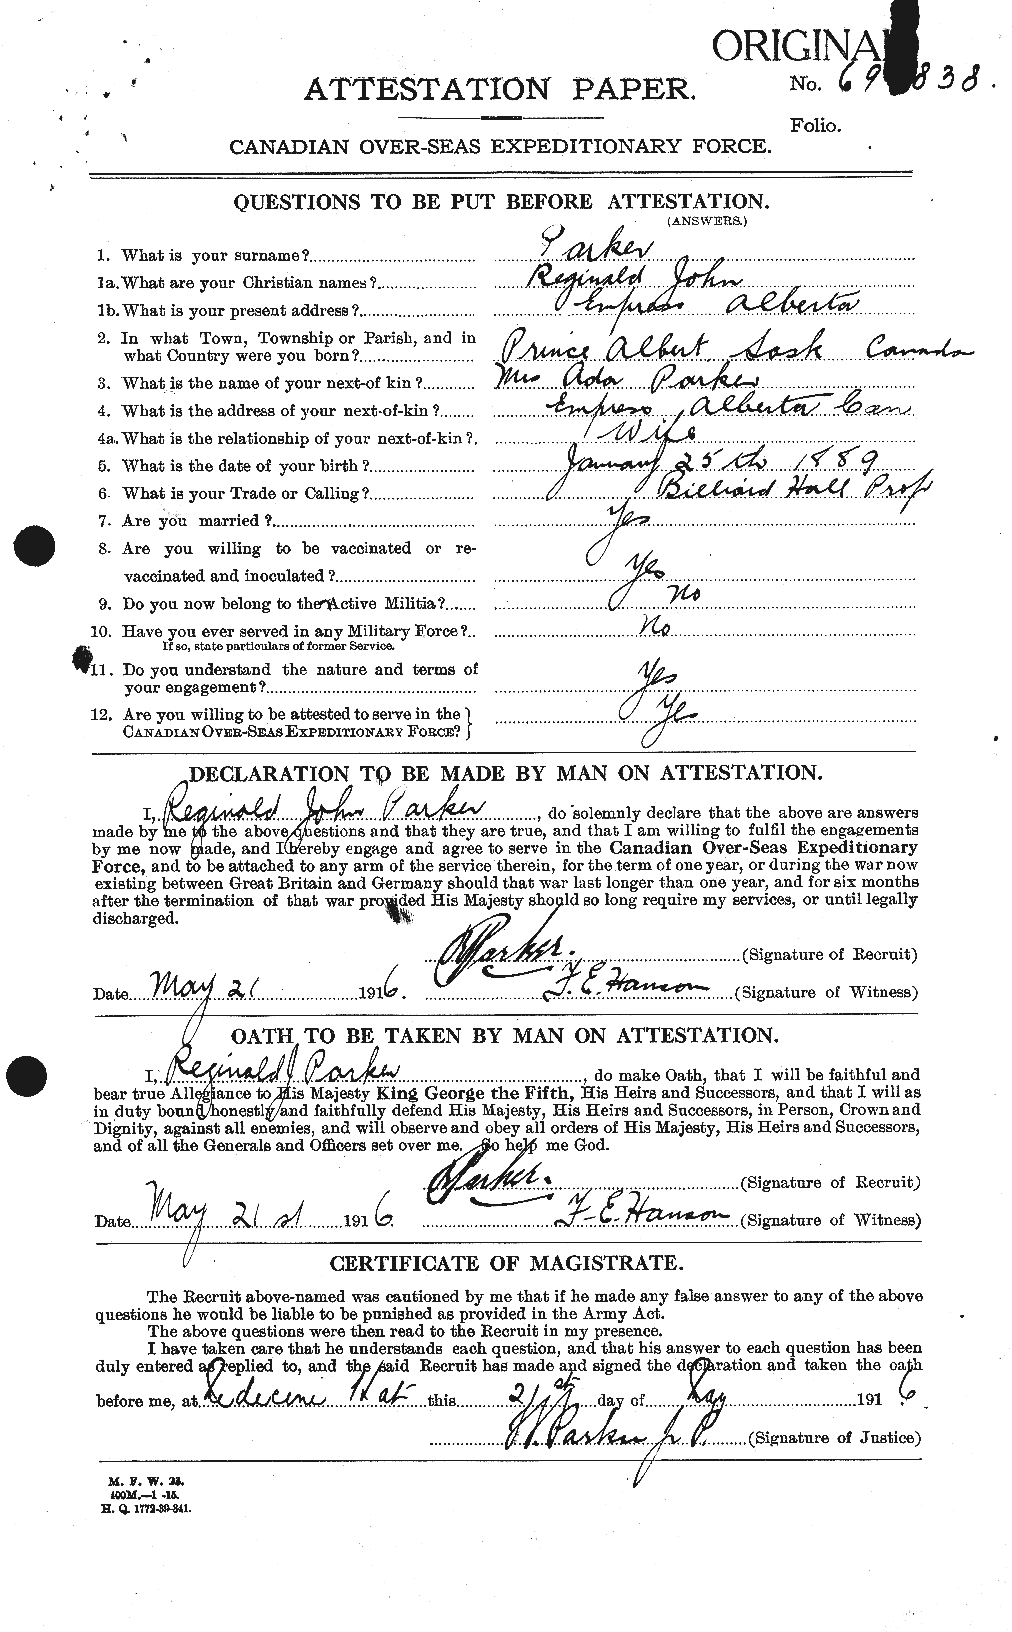 Personnel Records of the First World War - CEF 565578a